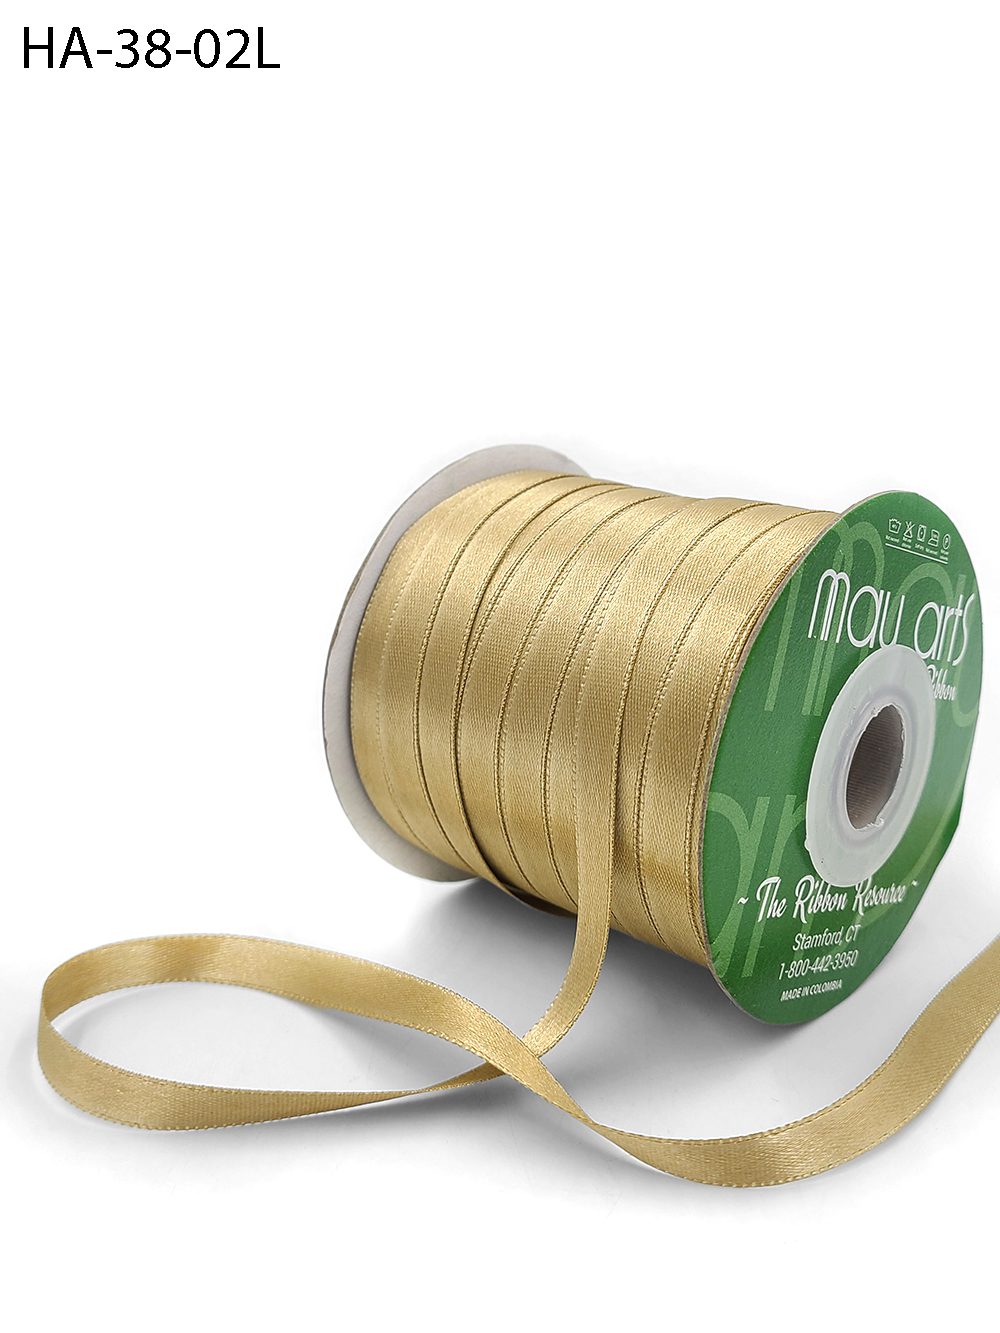 Wired Lustrous Gold or Silver Ribbon, 2 1/2 inch width